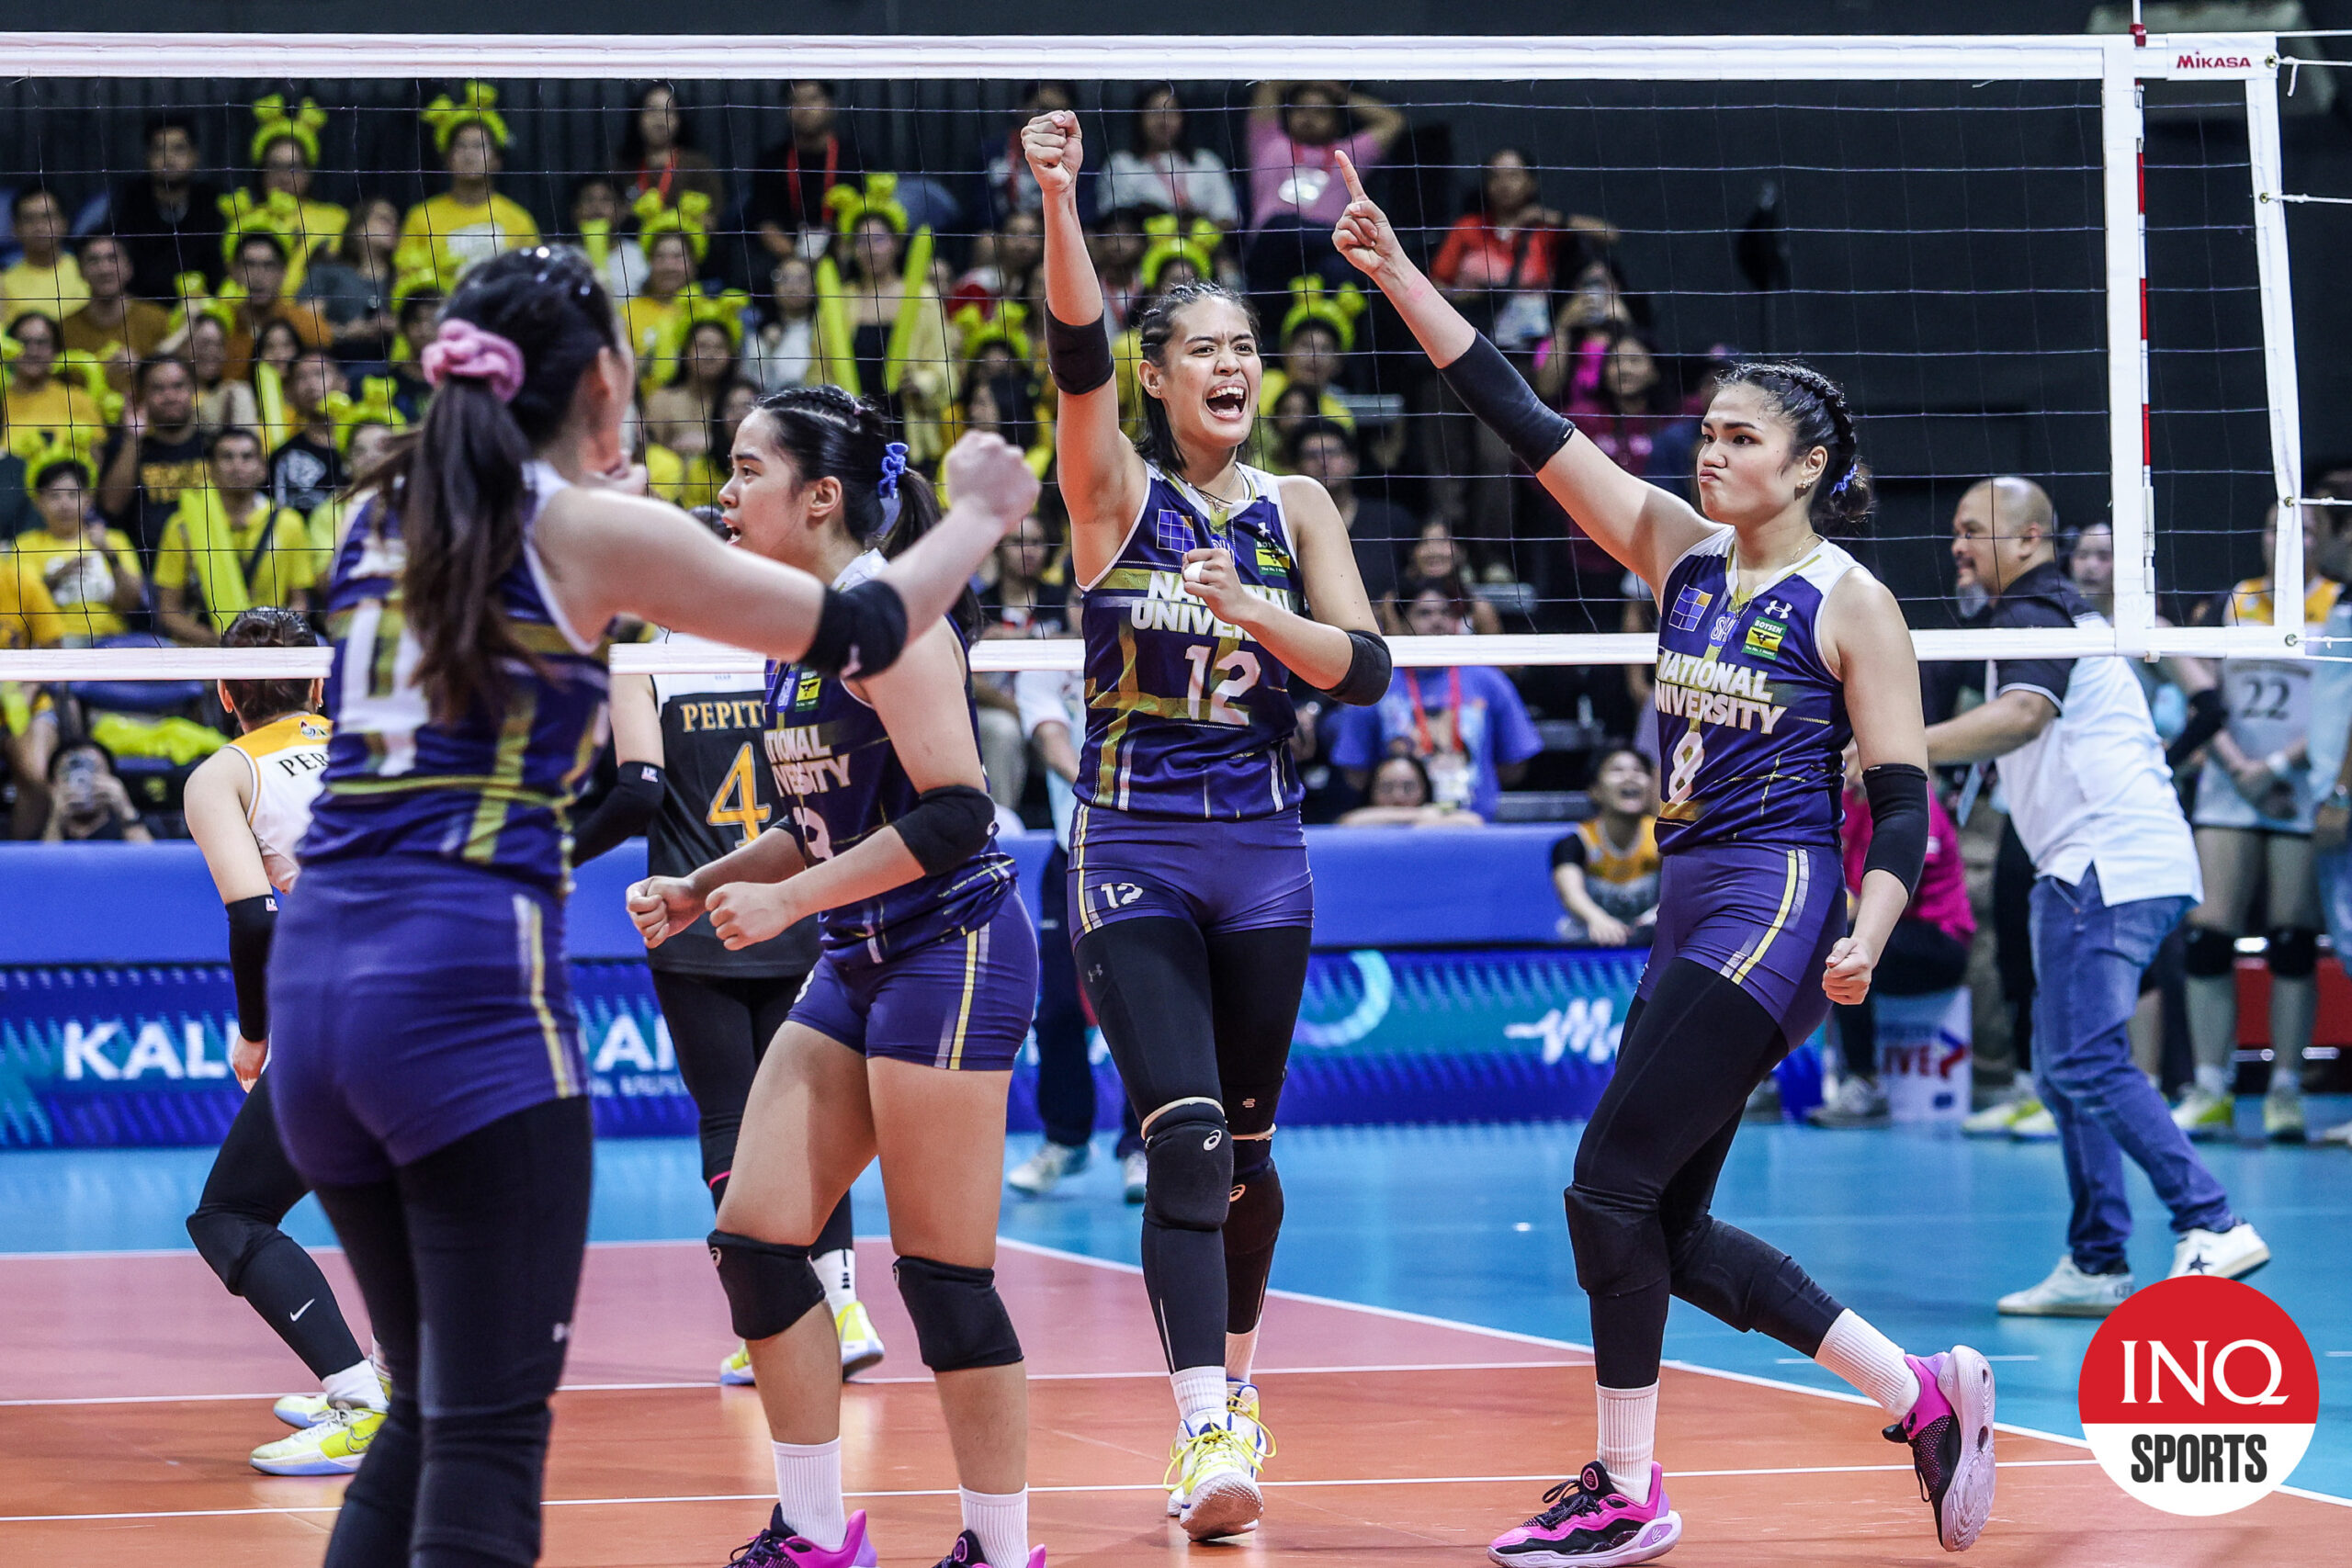 Alyssa Solomon leads the NU Lady Bulldogs to a Game 1 win over the UST Tigresses in the UAAP Season 86 women's volleyball Finals Game 1